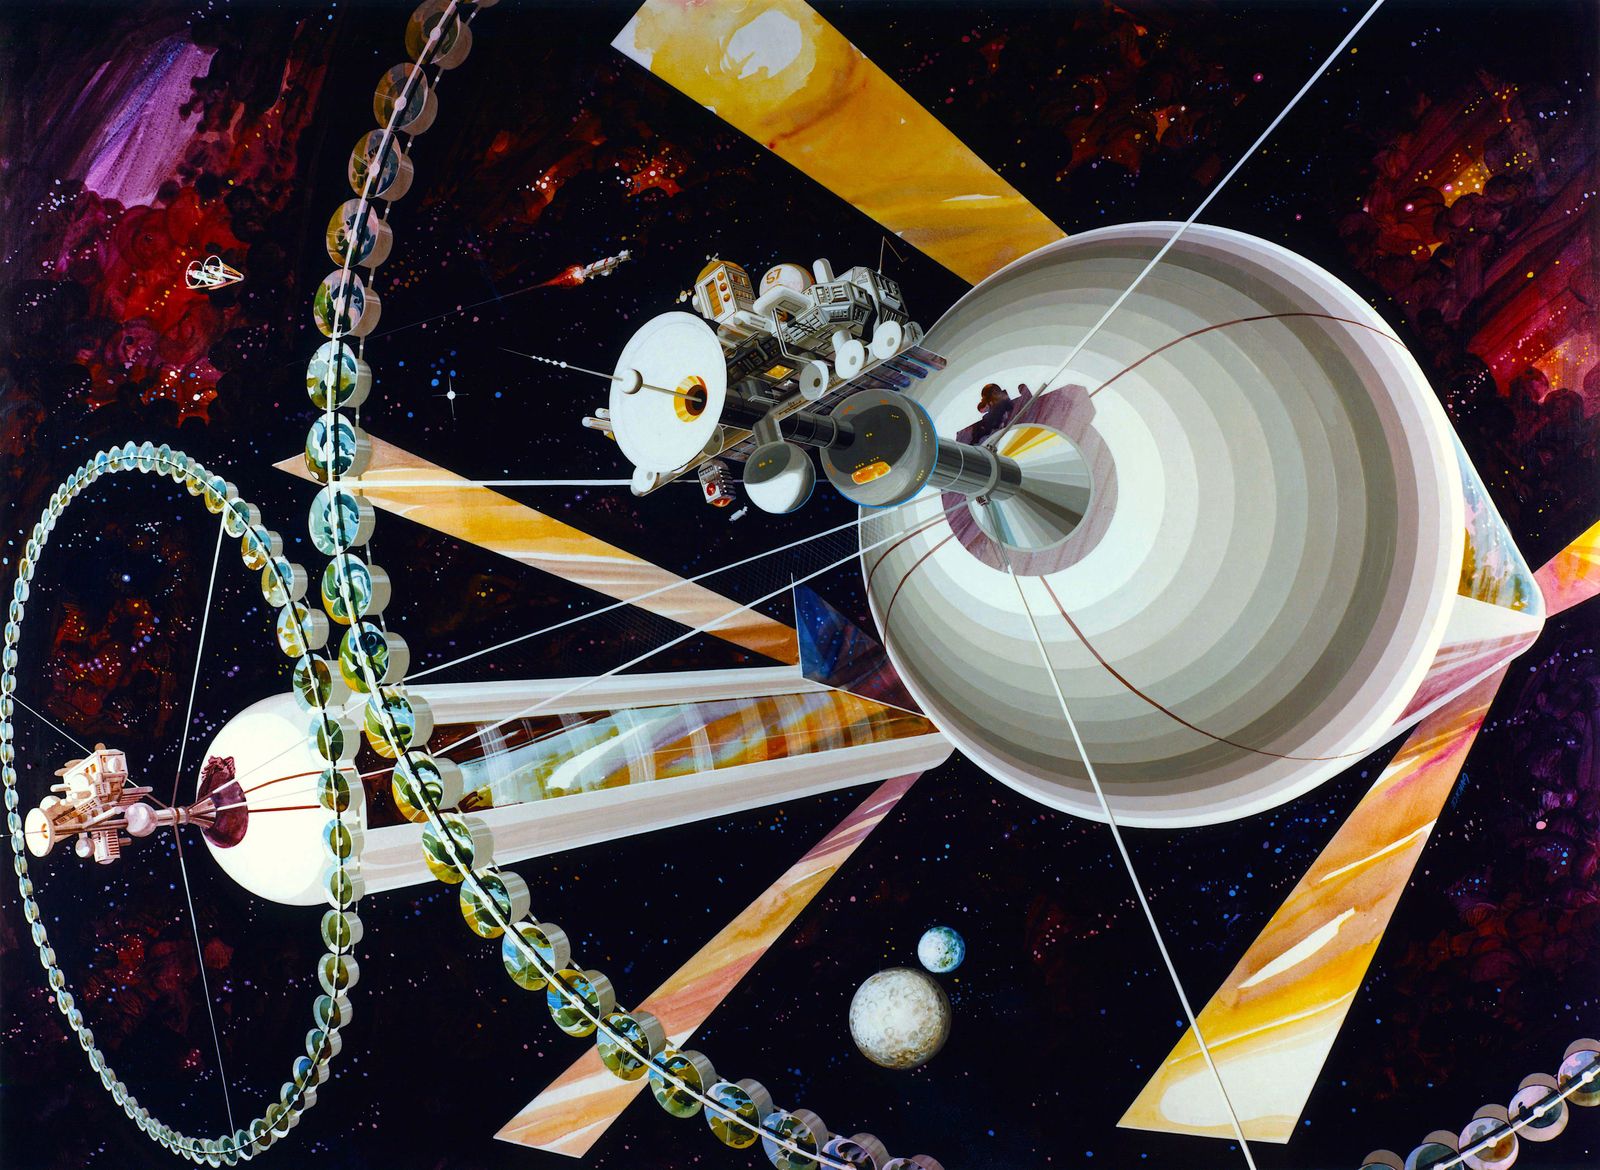 How NASA Marketed Its Space Program With Fantastical Depictions of the Future